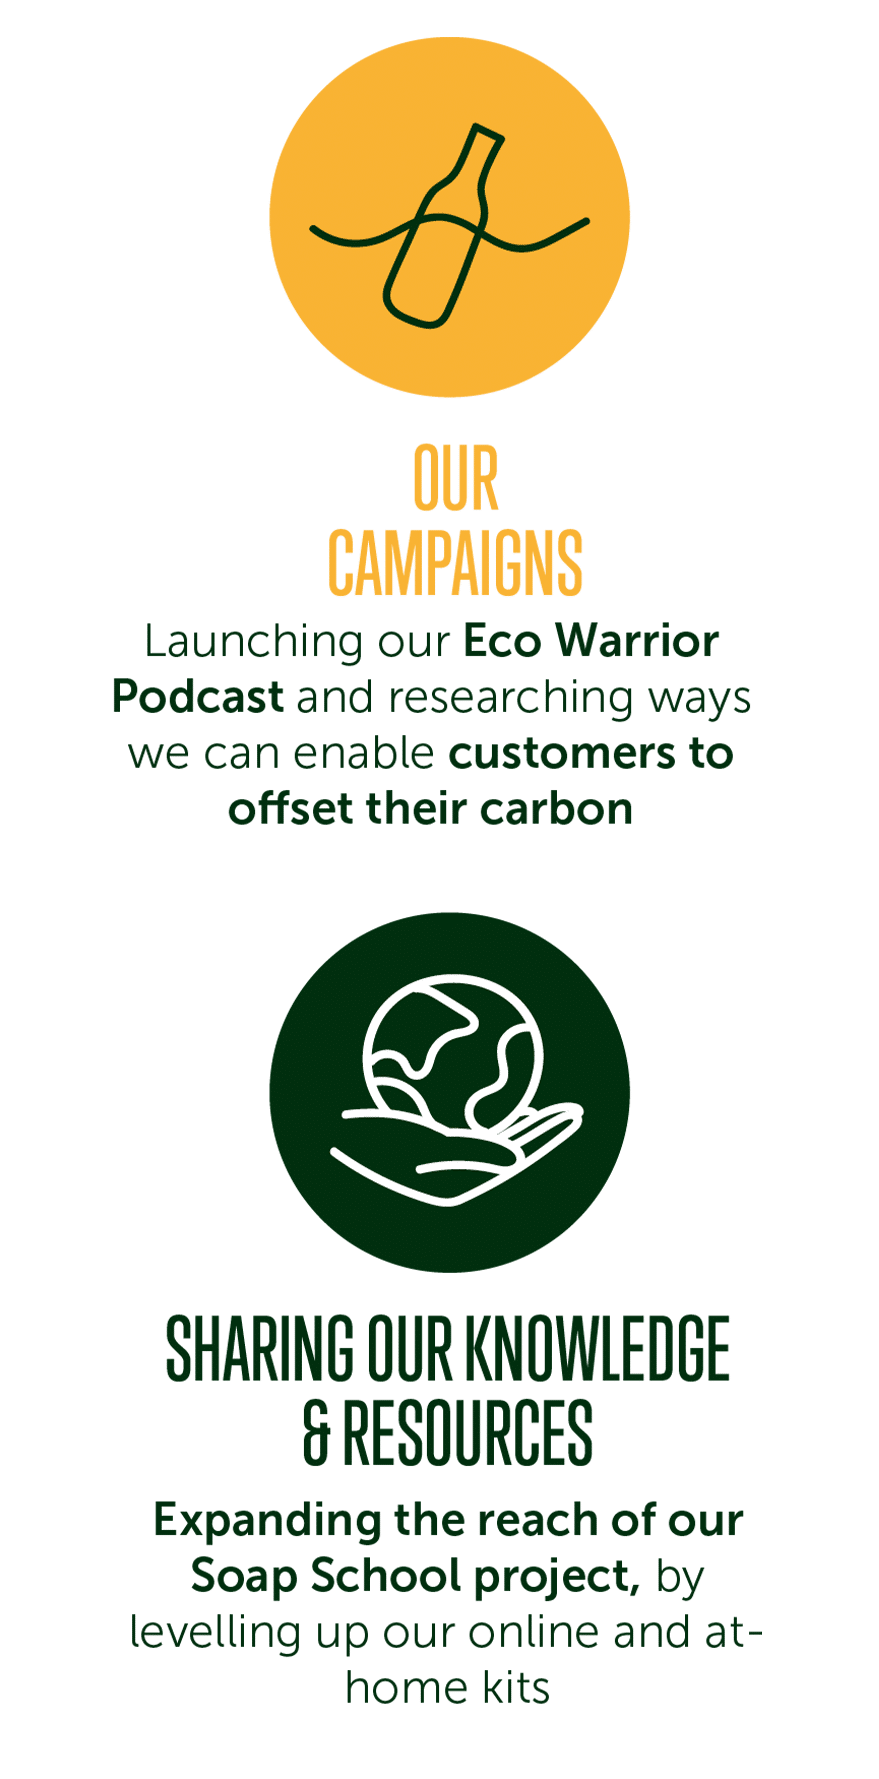 Icon with title of "Our campaigns" with sub-points including "Launching our Eco Warrior Podcast and researching ways we can enable customers to offset their carbon" and another icon with title "Sharing our knowledge & resources" with sub-points including "Expanding the reach of our Soap School project, by levelling up our online and at-home kits."